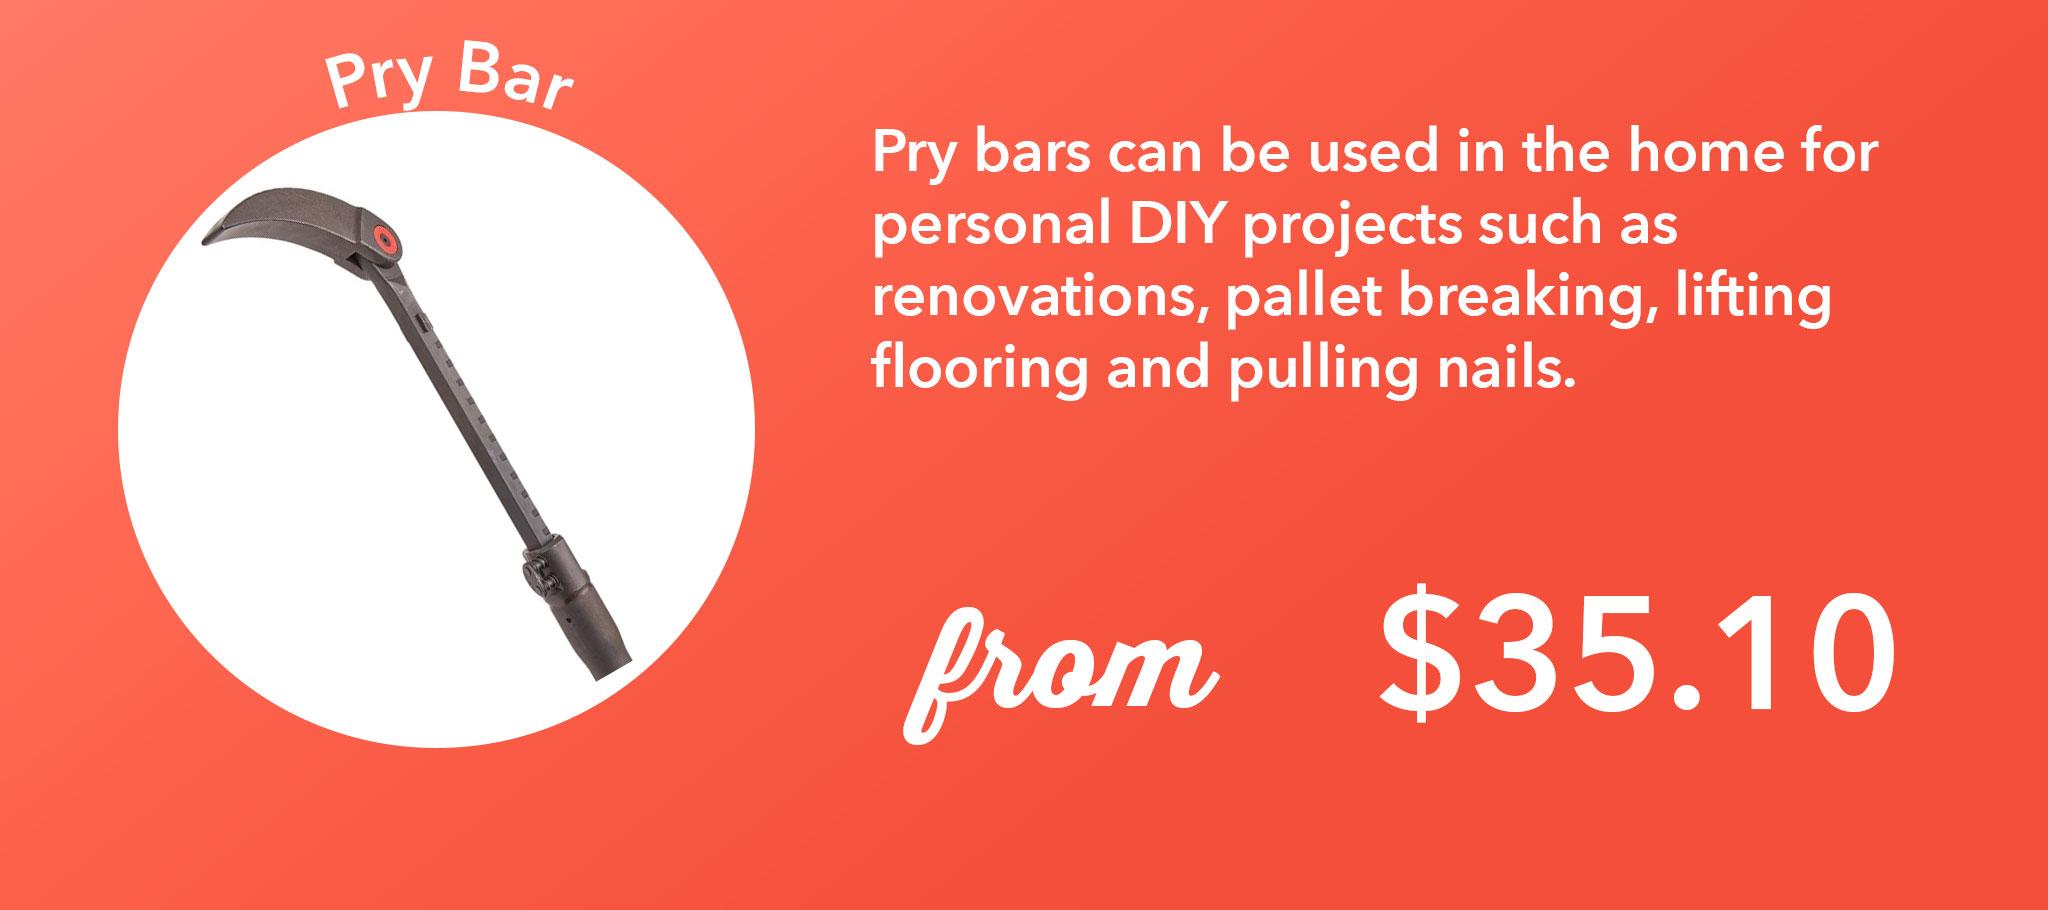 Pry bars can be used in the home for personal DIY projects such as renovations, pallet breaking, lifting flooring and pulling nails.